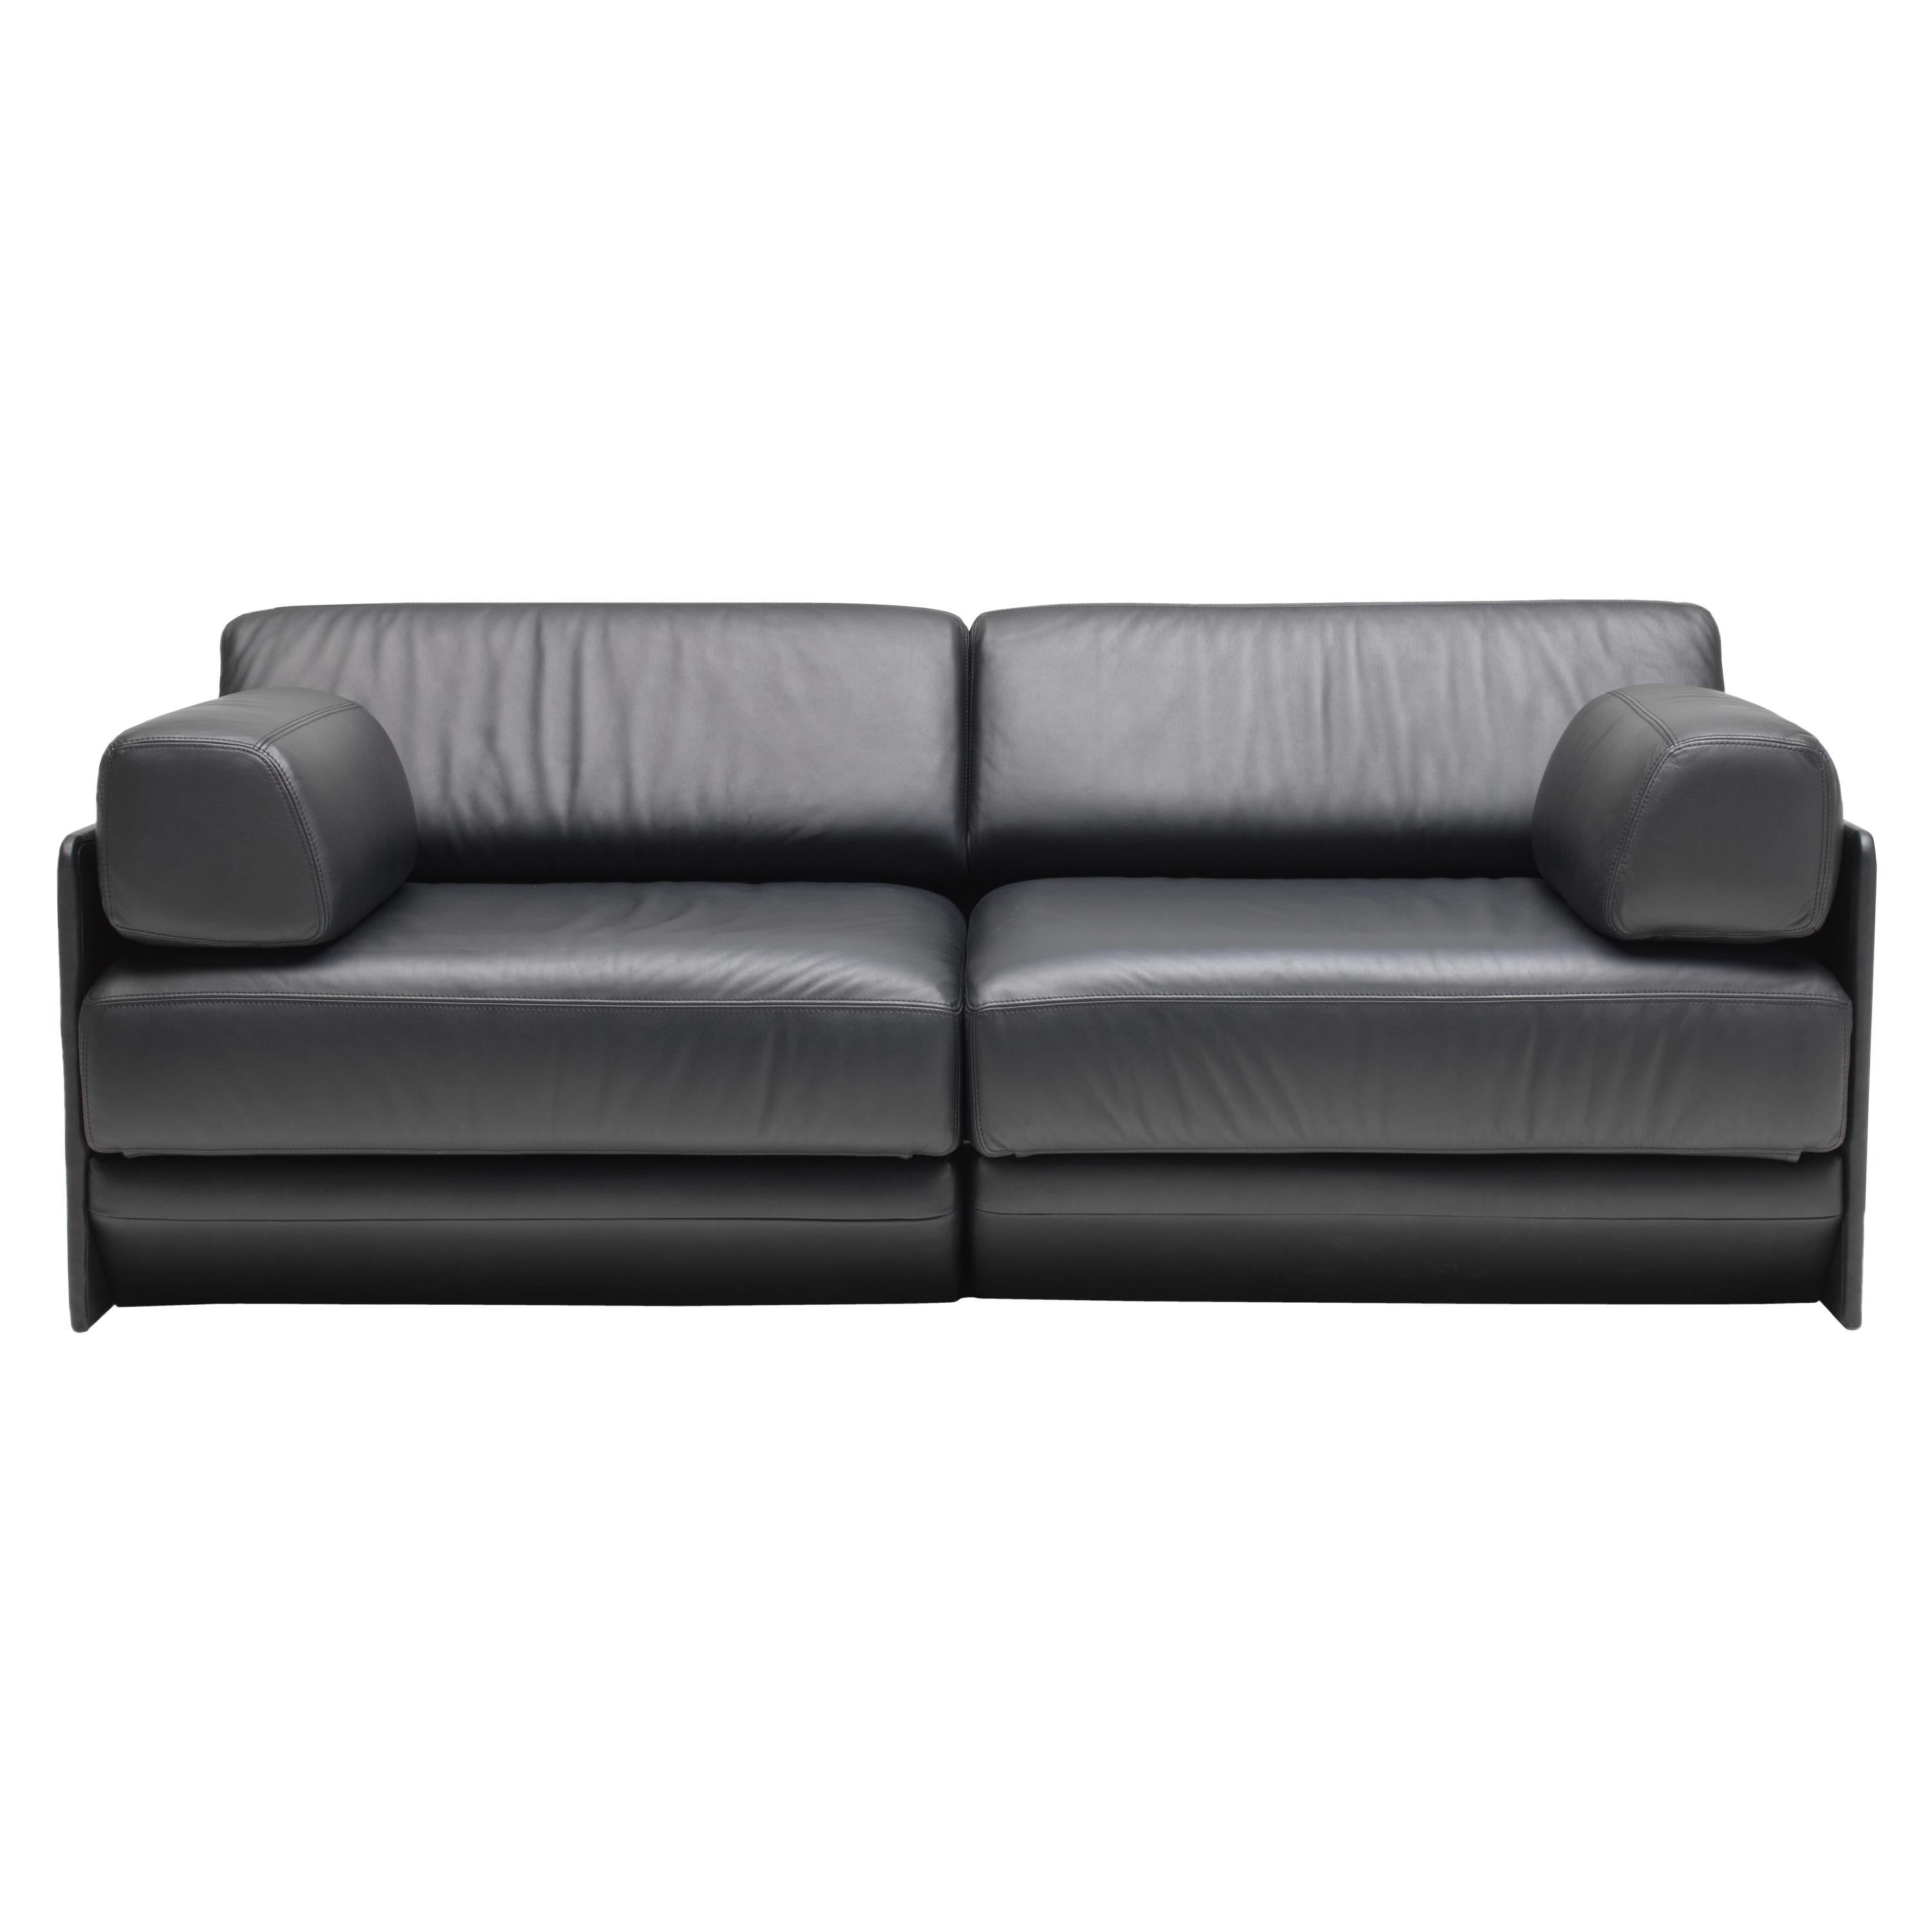 DS-76 Convertible Leather Modern Sofa or Daybed by De Sede